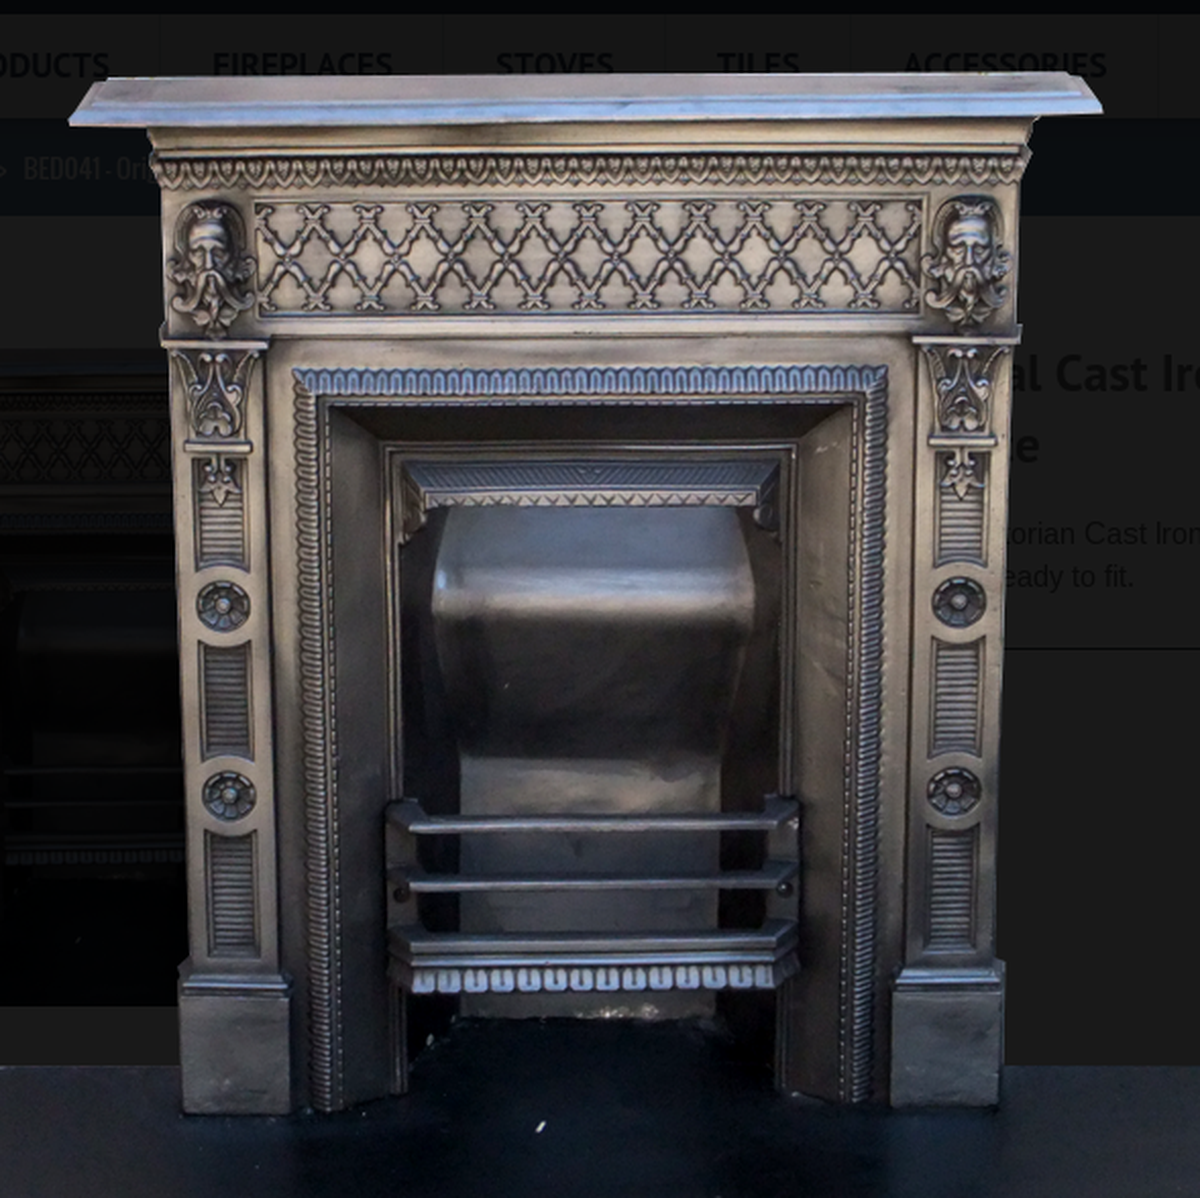 Secondhand Vintage And Reclaimed Fireplaces And Fire Surrounds Original Cast Iron Late Victorian Bedroom Fireplace Cheshire